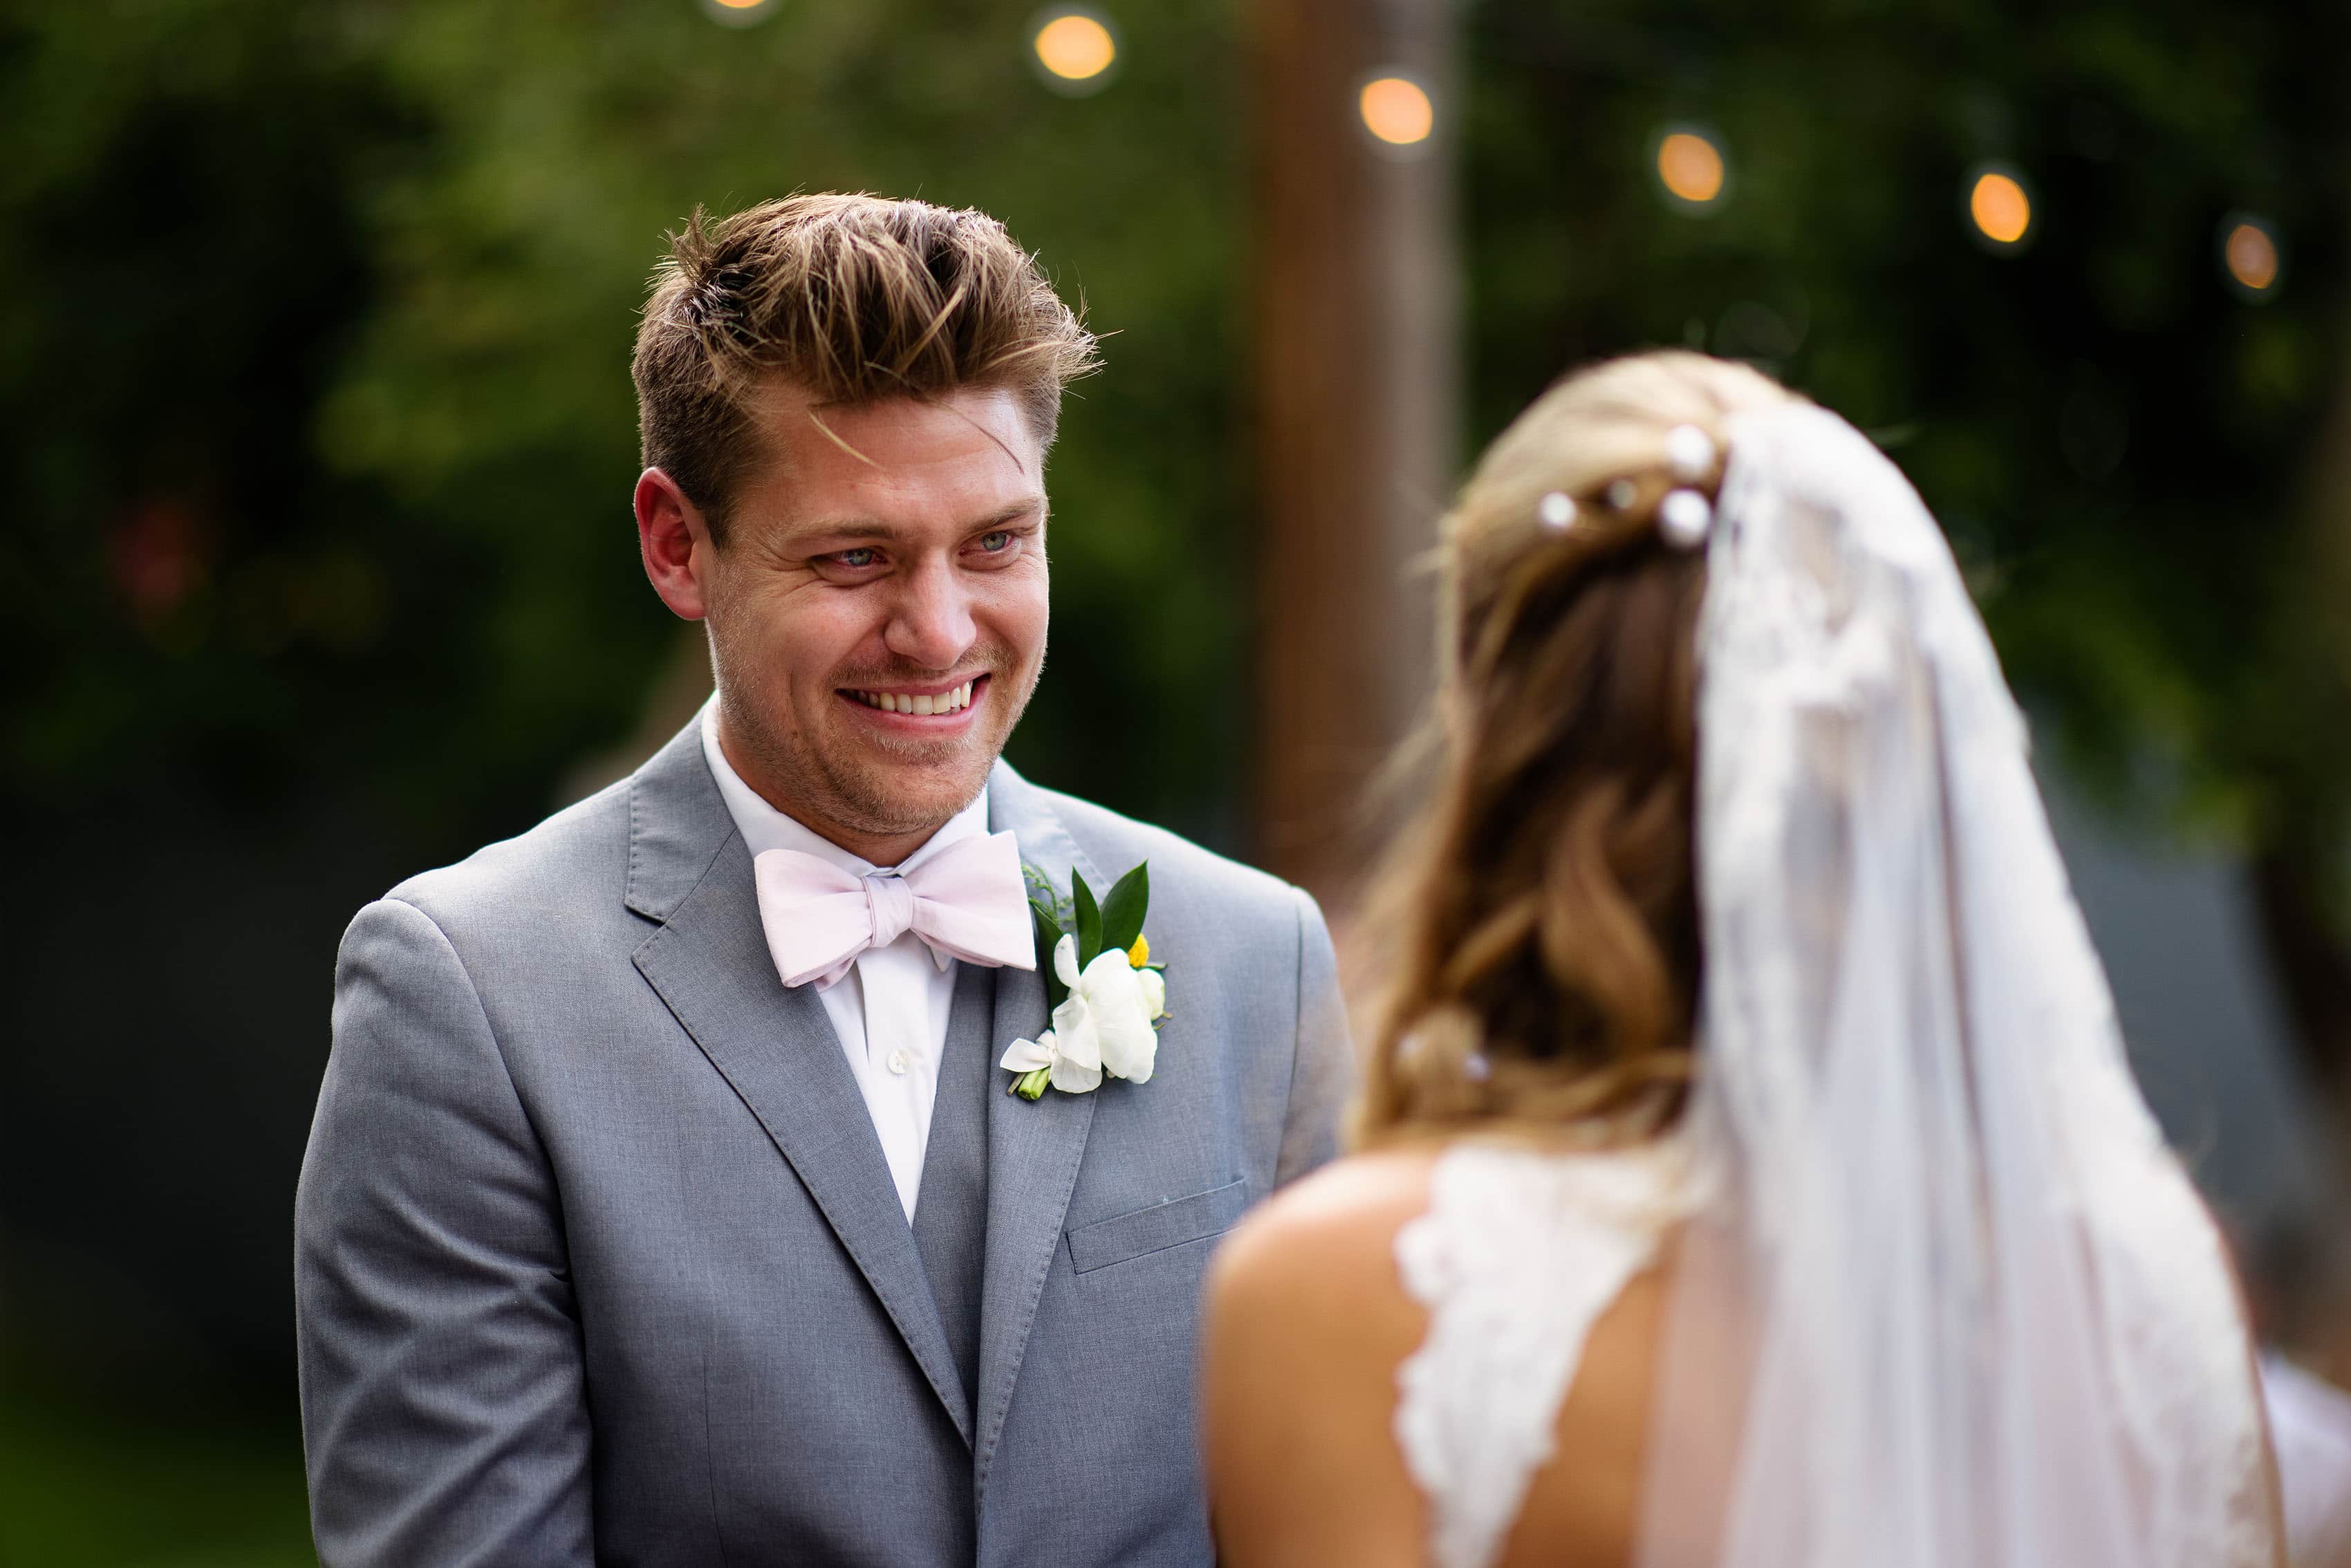 The groom smiles at the bride during the ceremony